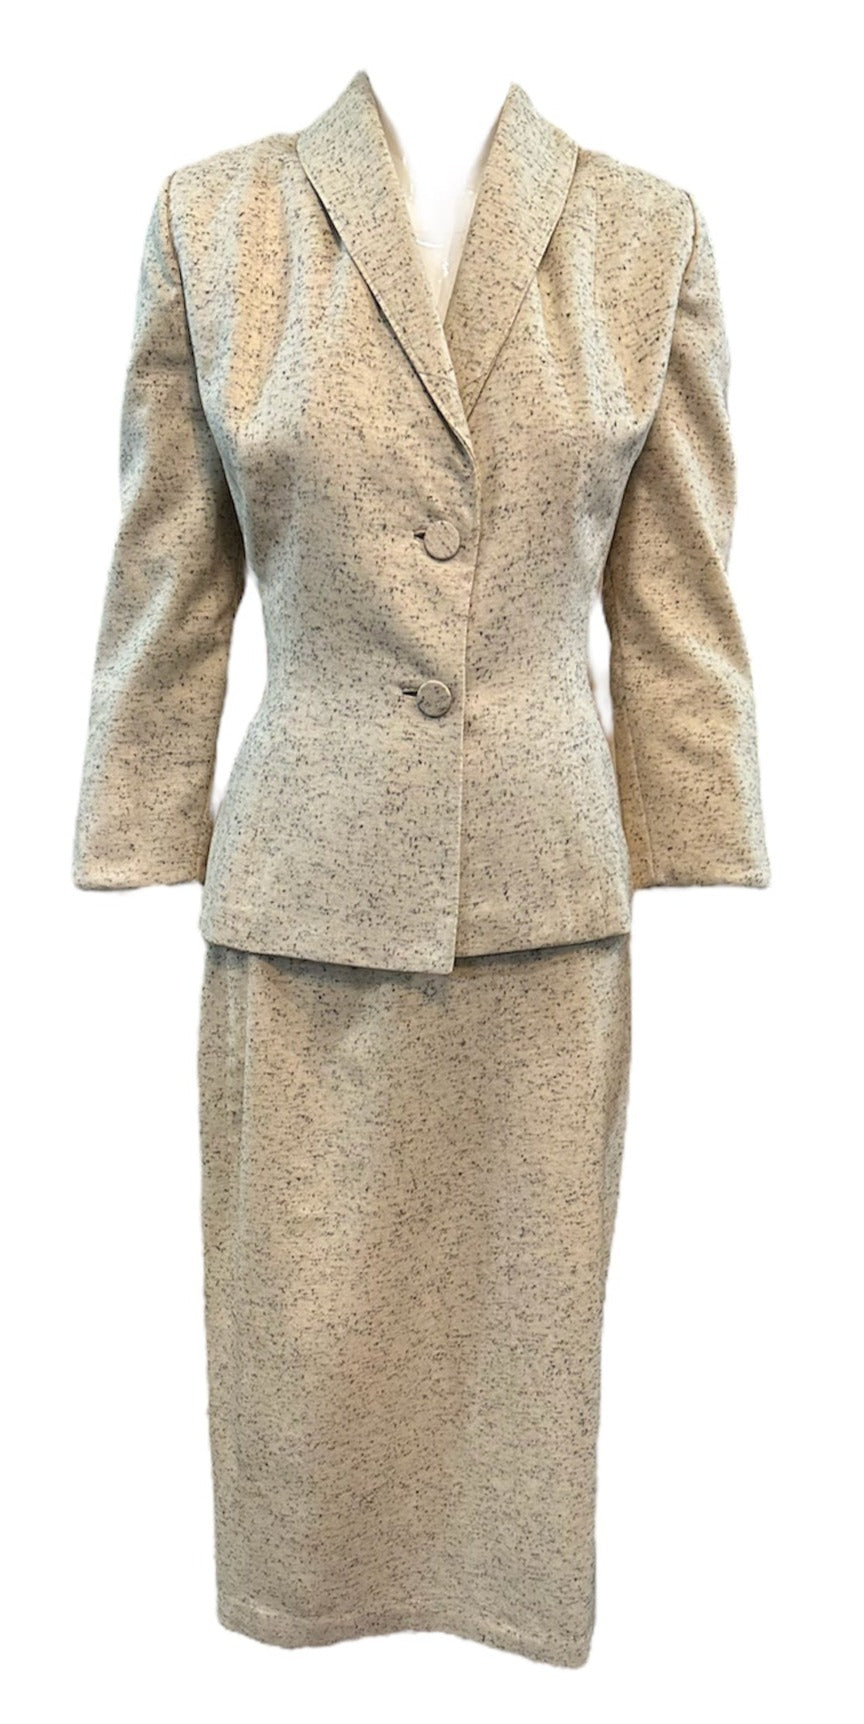  Lilli Ann 1950s Ivory Flecked Wool Skirt Suit FRONT 1 of 7